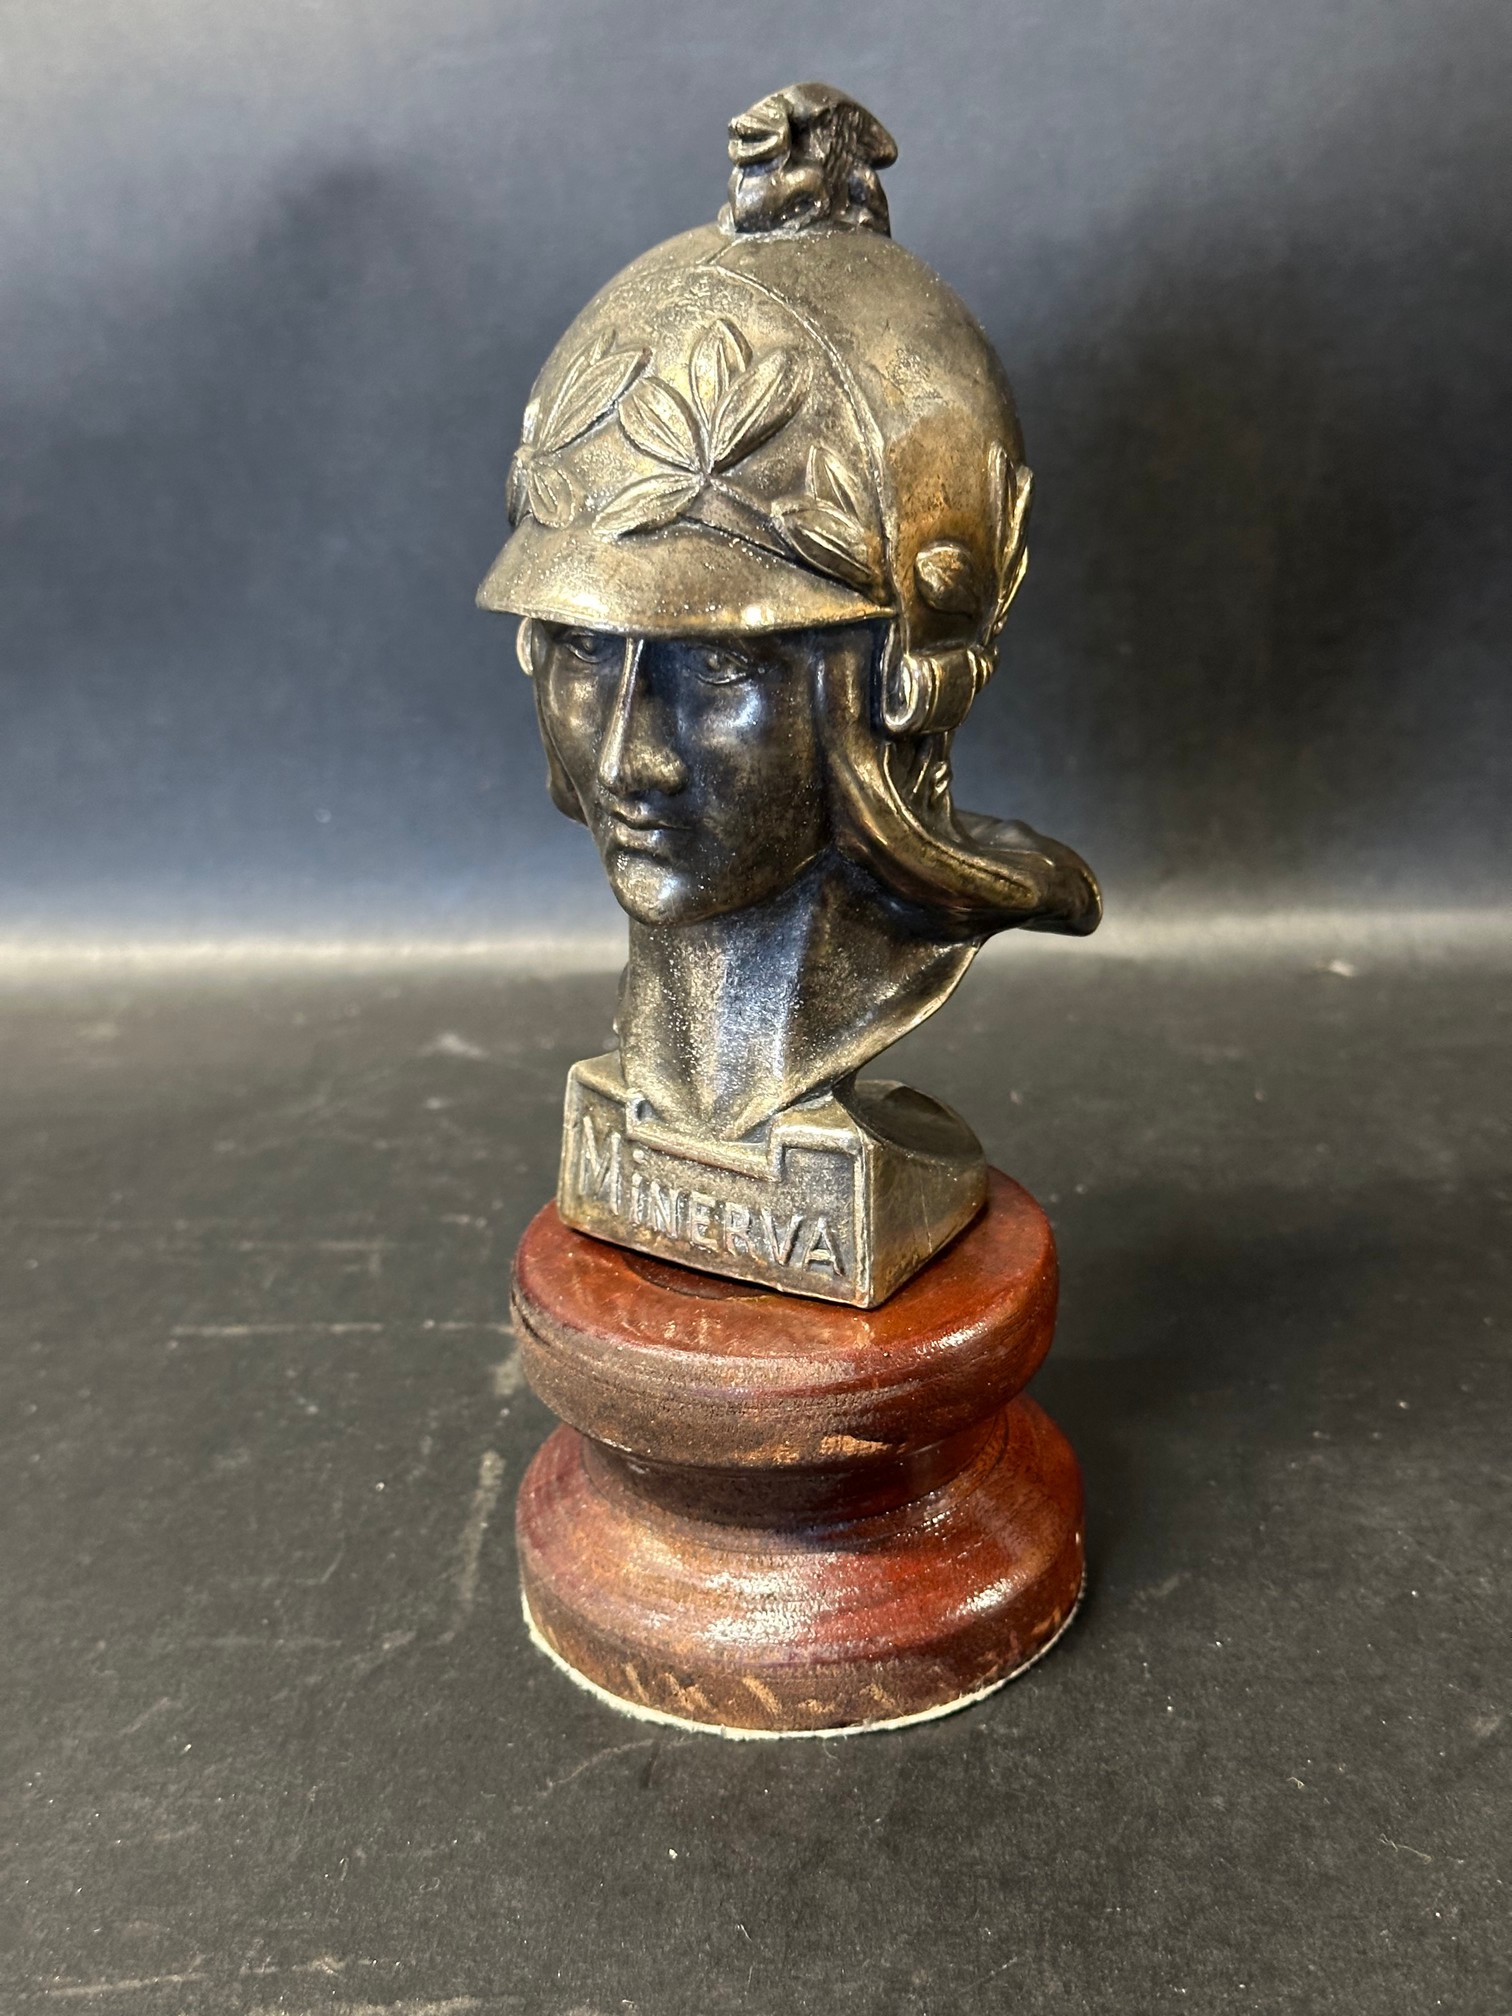 A Minerva (Roman Goddess) car accessory mascot with griffin on helmet, mounted to wooden base.